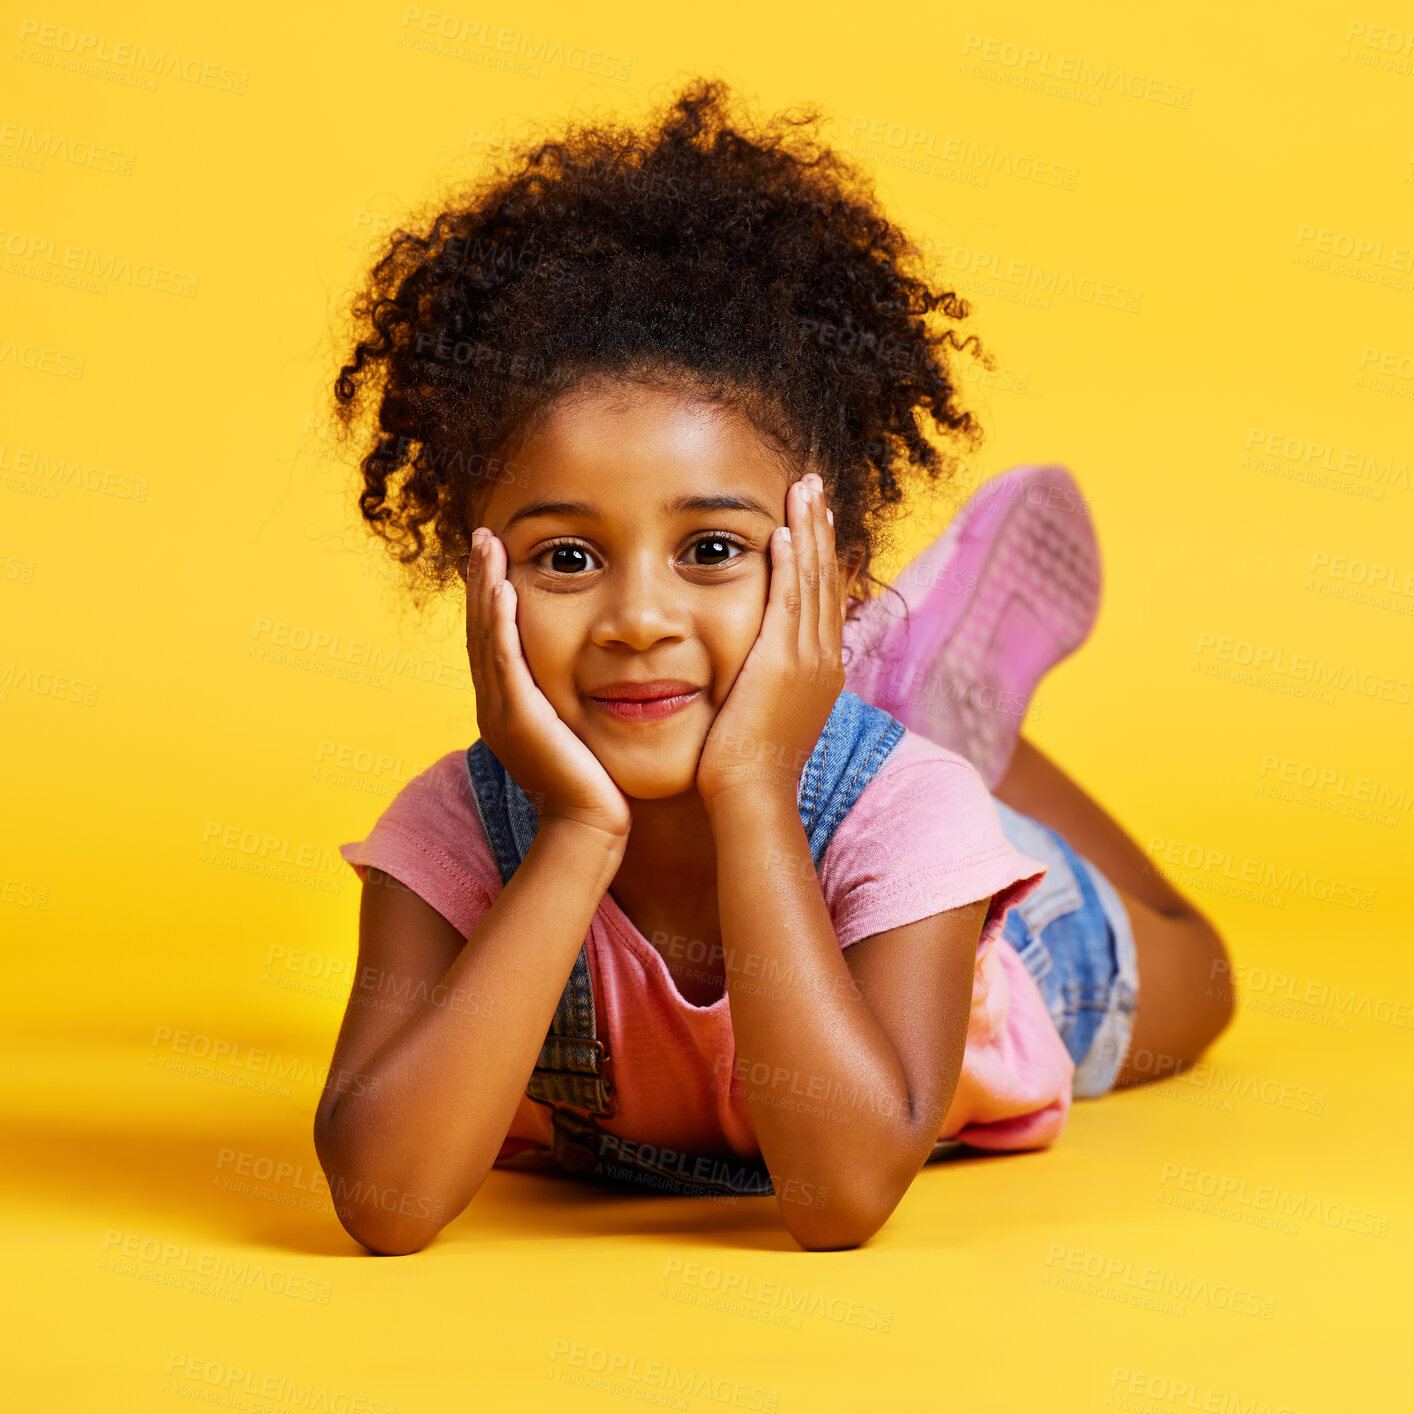 Buy stock photo Smile, cute and portrait of a child on the floor isolated on a yellow background in a studio. Adorable, sweet and an innocent girl lying down looking happy, beautiful and relaxed on a backdrop